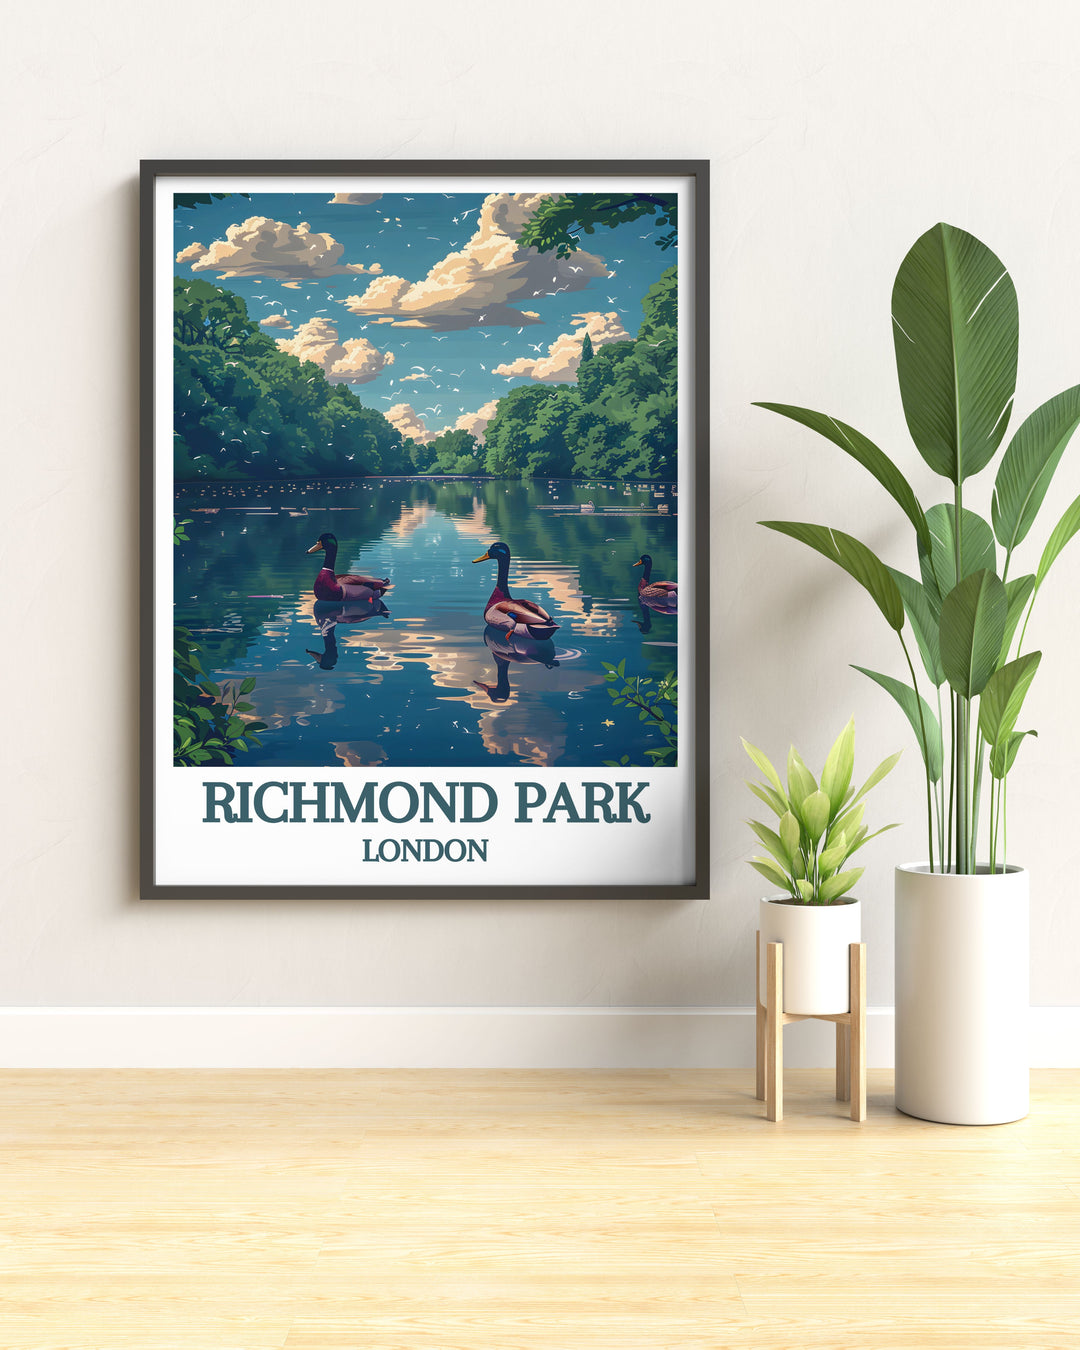 Pen Ponds Posters bringing the natural beauty and timeless charm of this beloved London park into your home.